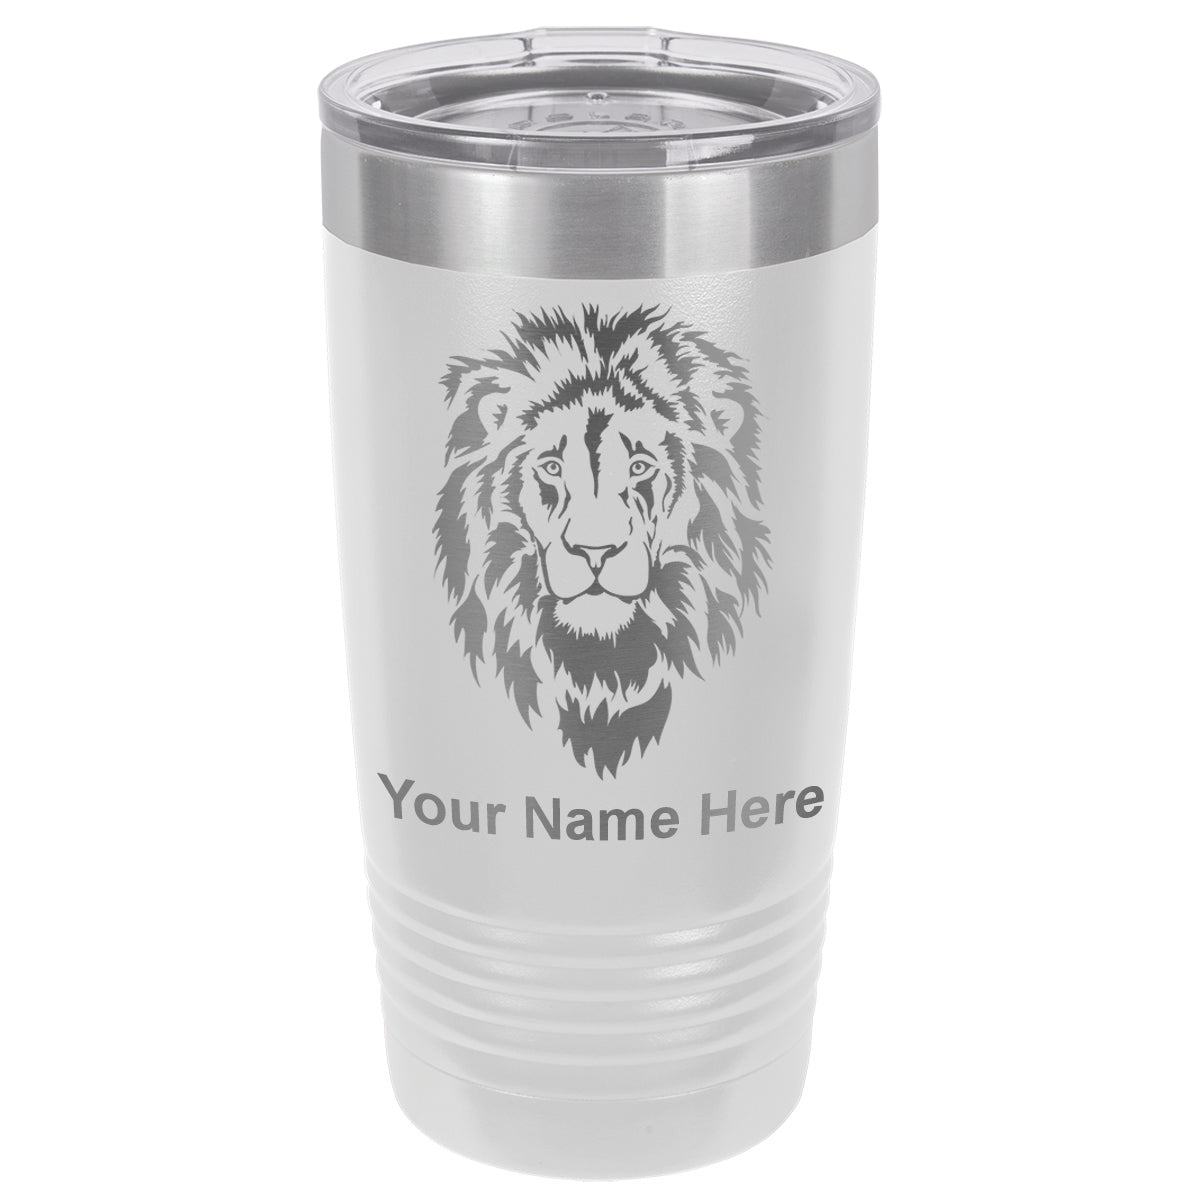 20oz Vacuum Insulated Tumbler Mug, Lion Head, Personalized Engraving Included